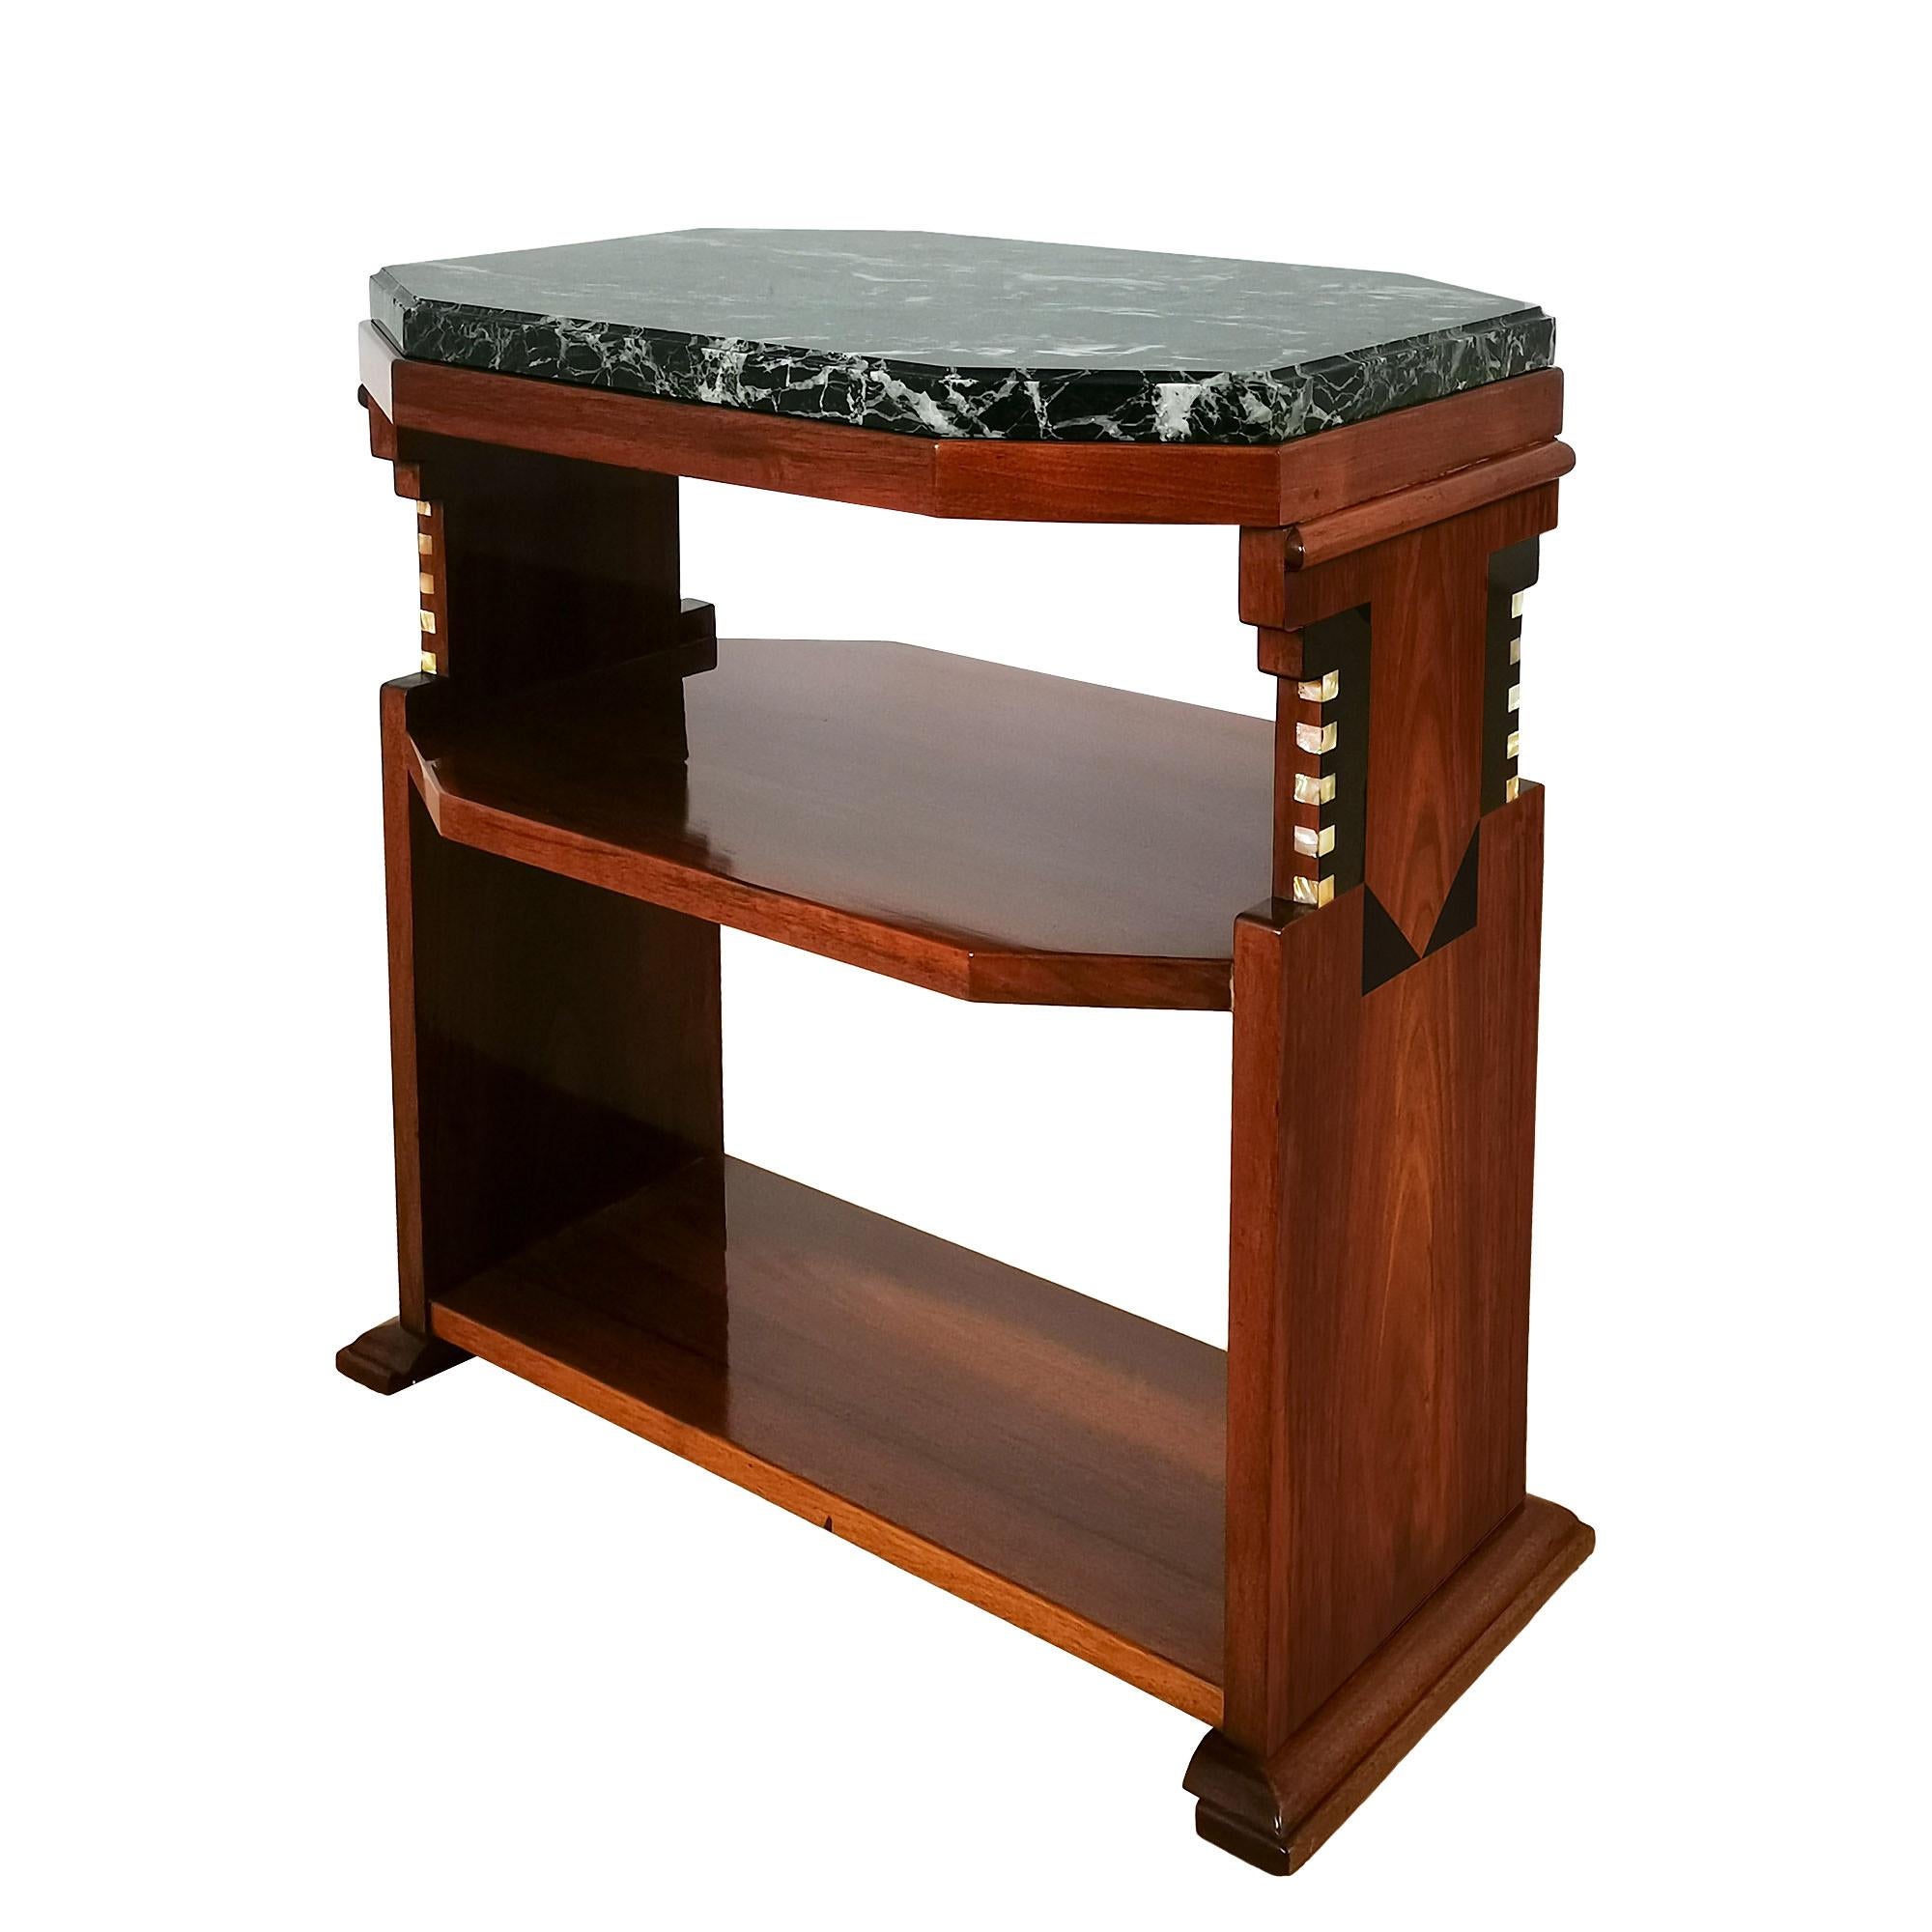 Belgian 1925 Cubist Art Deco Side Table in Solid Walnut and Marble on Top - Belgium For Sale